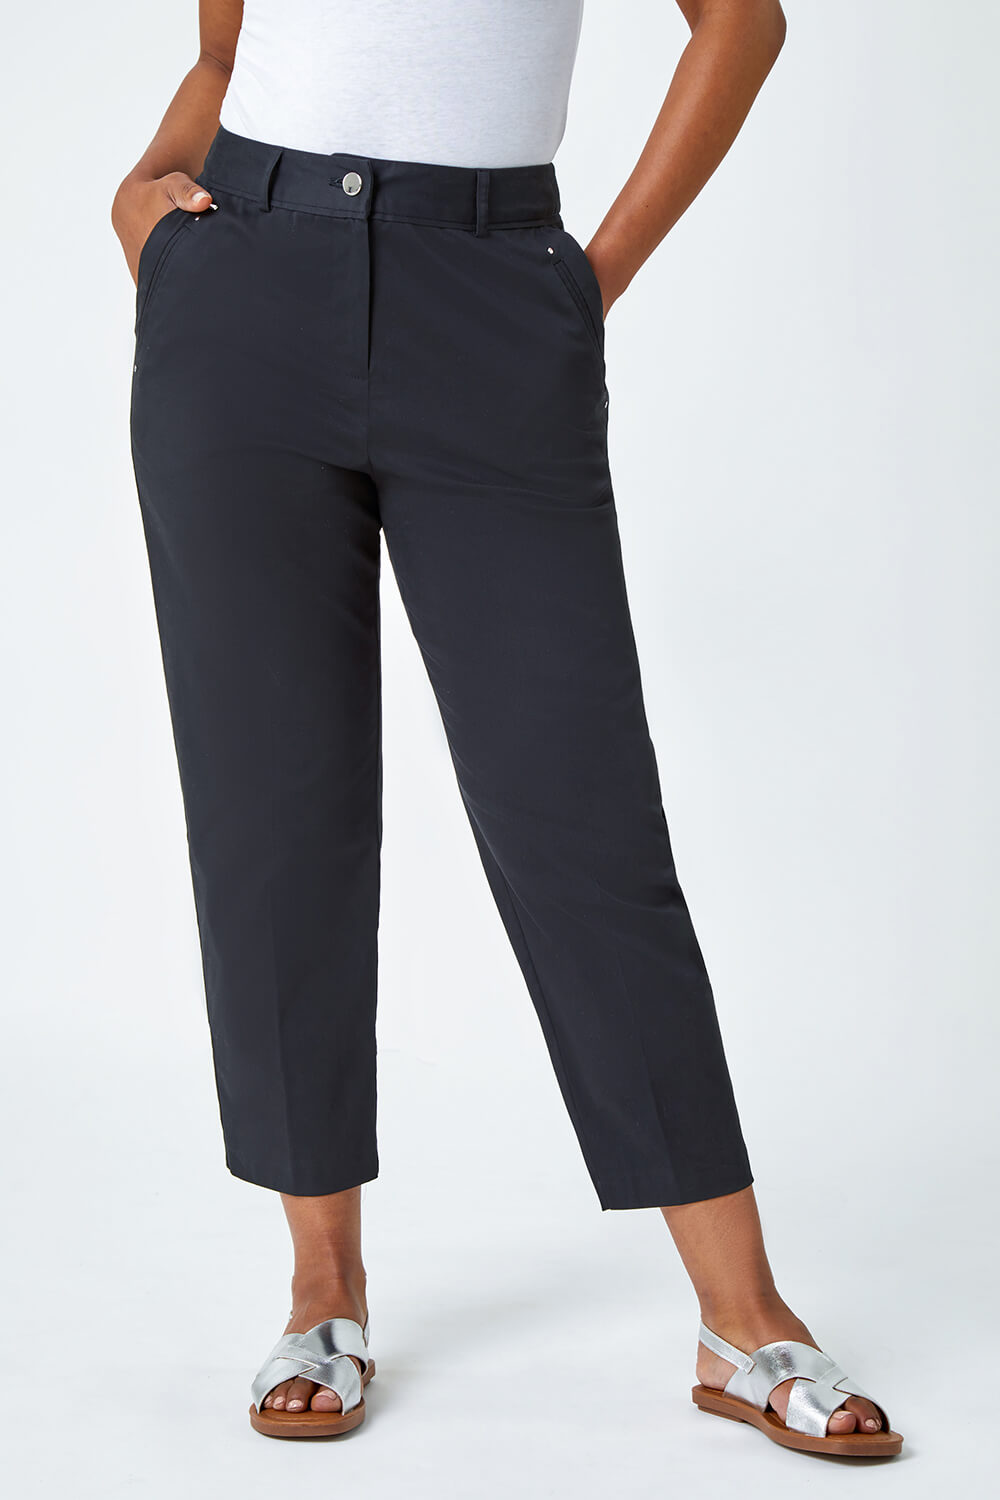 Black Petite Cotton Blend Stretch Trousers, Image 4 of 5